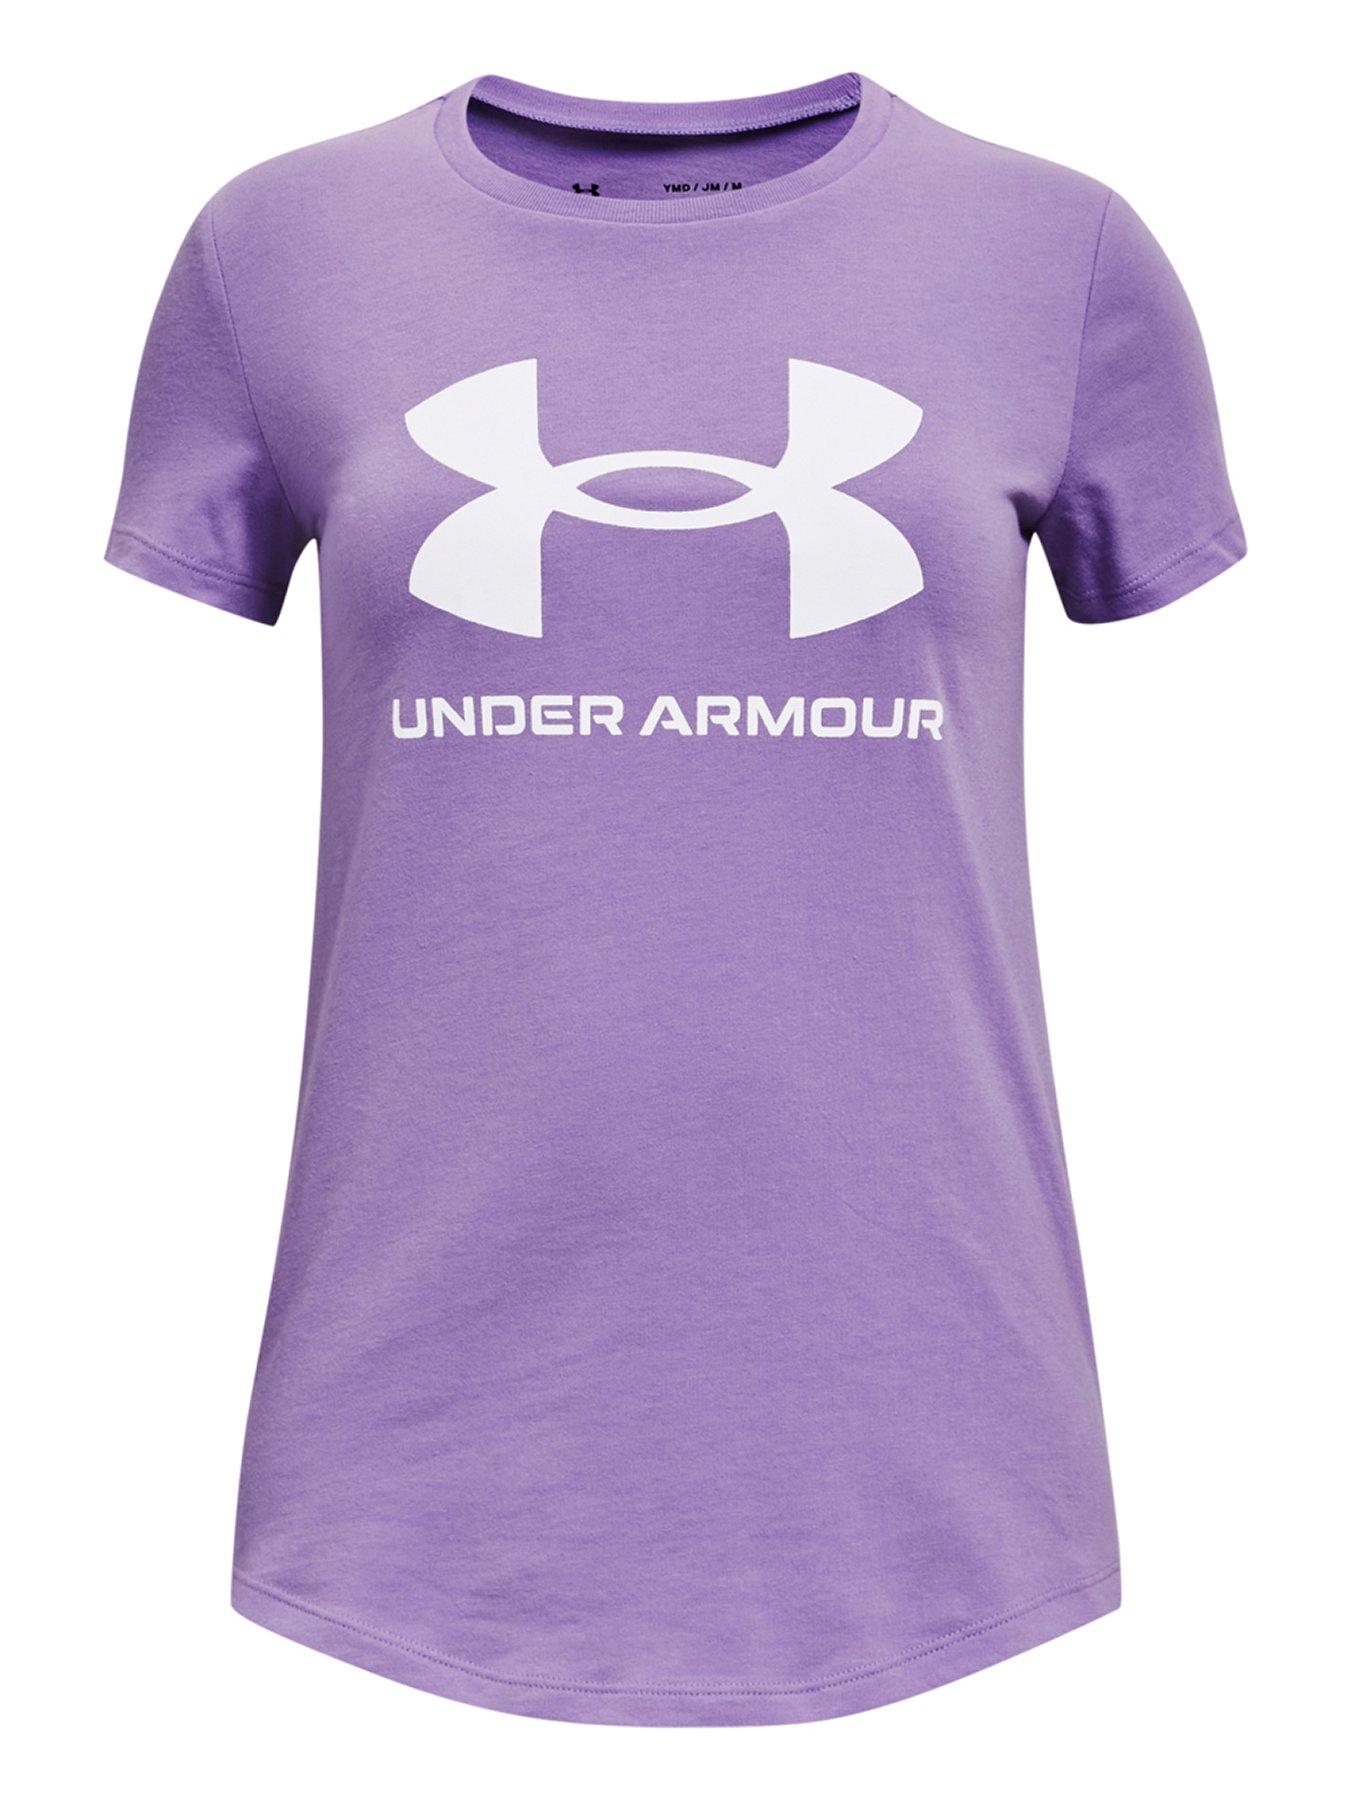 Details about   Under Armour Youth Small Medium Large XL Girls Pink Purple Black Camo Shirt NEW 